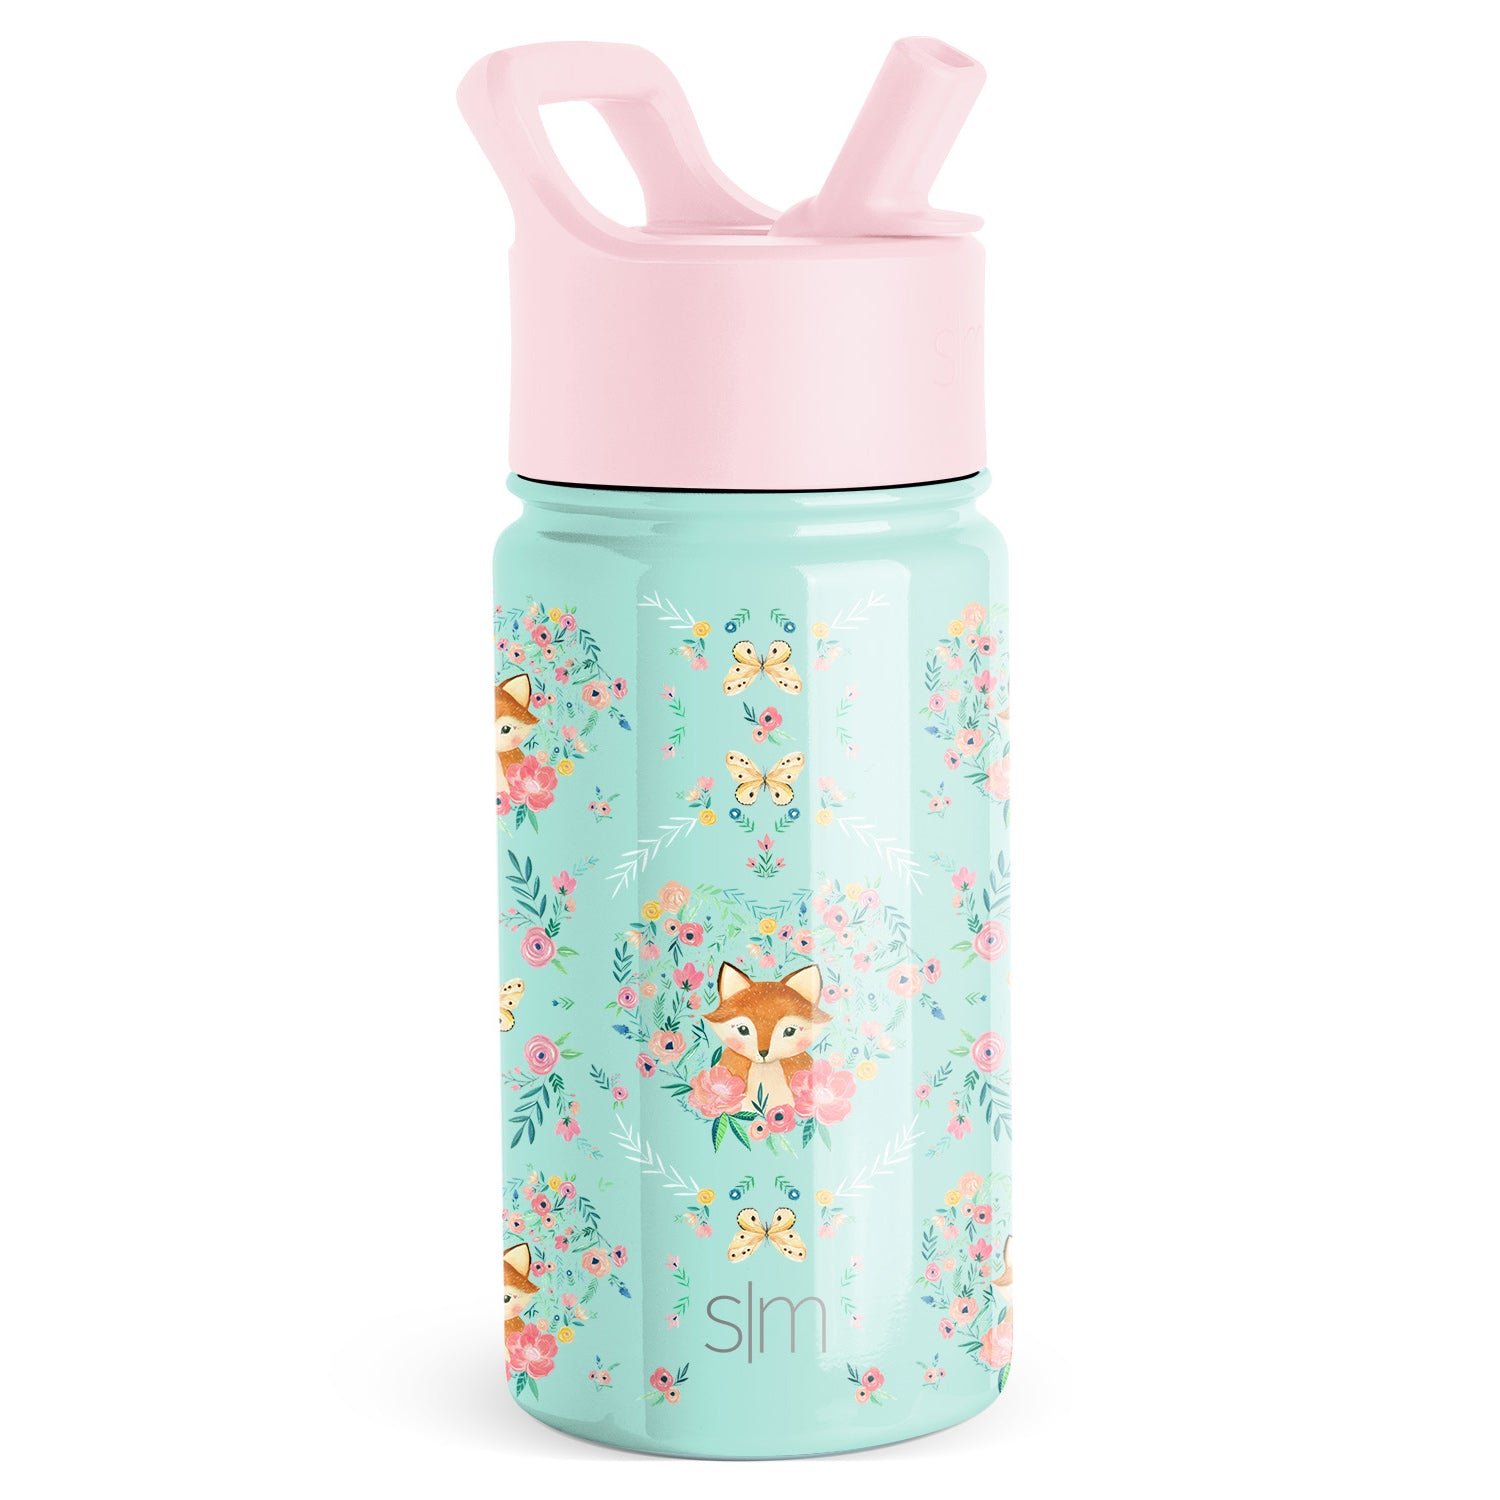 Simple Modern Kids Water Bottle with Straw Lid | Insulated Stainless Steel Reusable Tumbler for Toddlers, Girls | Summit | 14oz, Chloe Floral